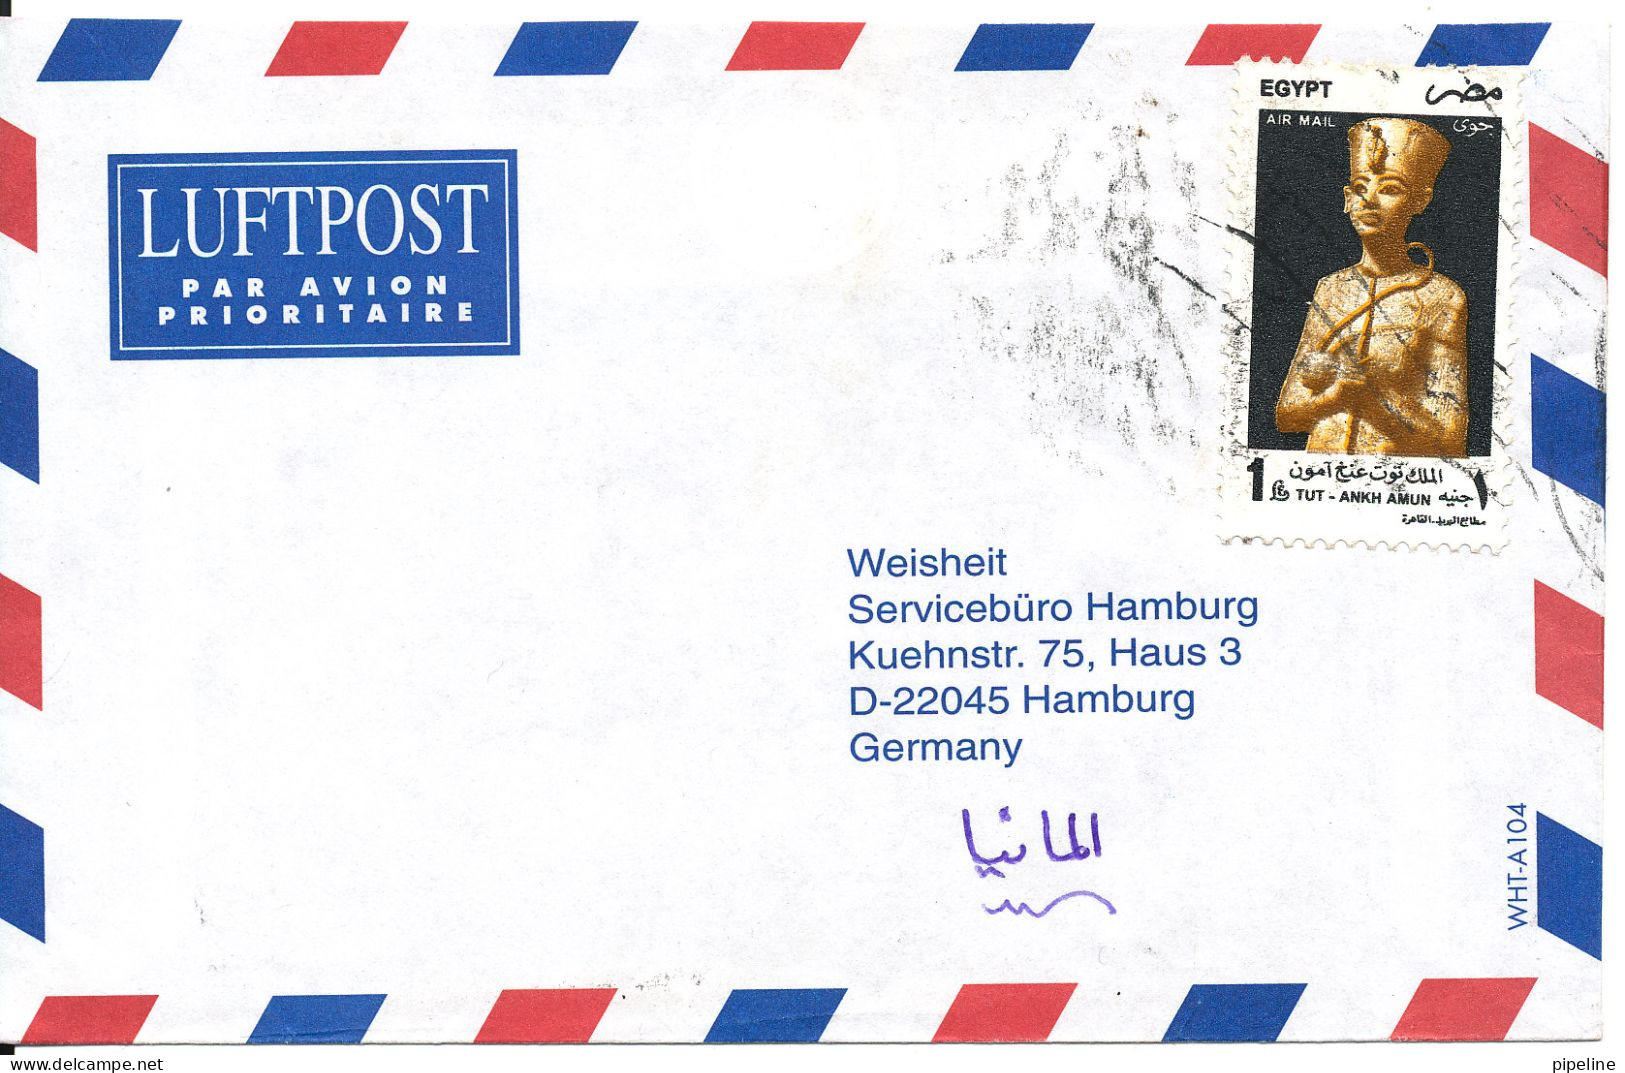 Egypt Air Mail Cover Sent To Germany - Luftpost